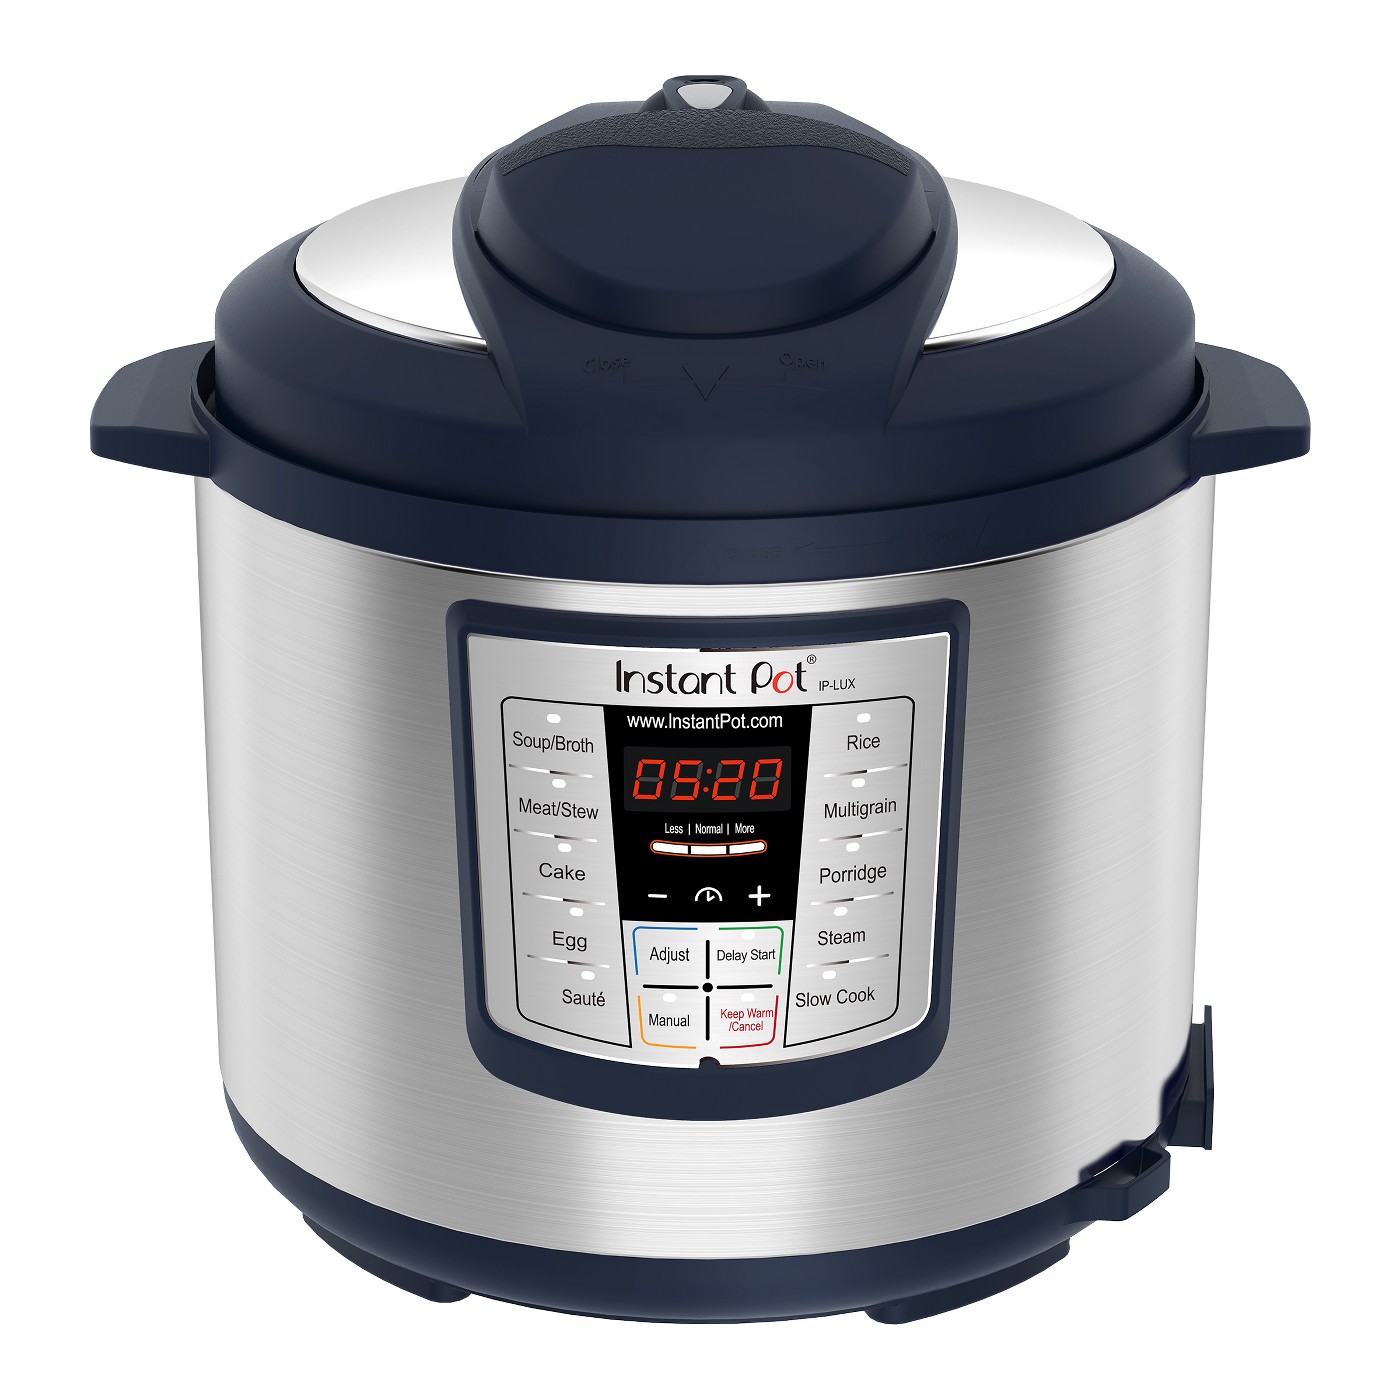 Instant Pot Lux 1000W Electric Pressure Cooker with Accessories - Navy - image 1 of 4